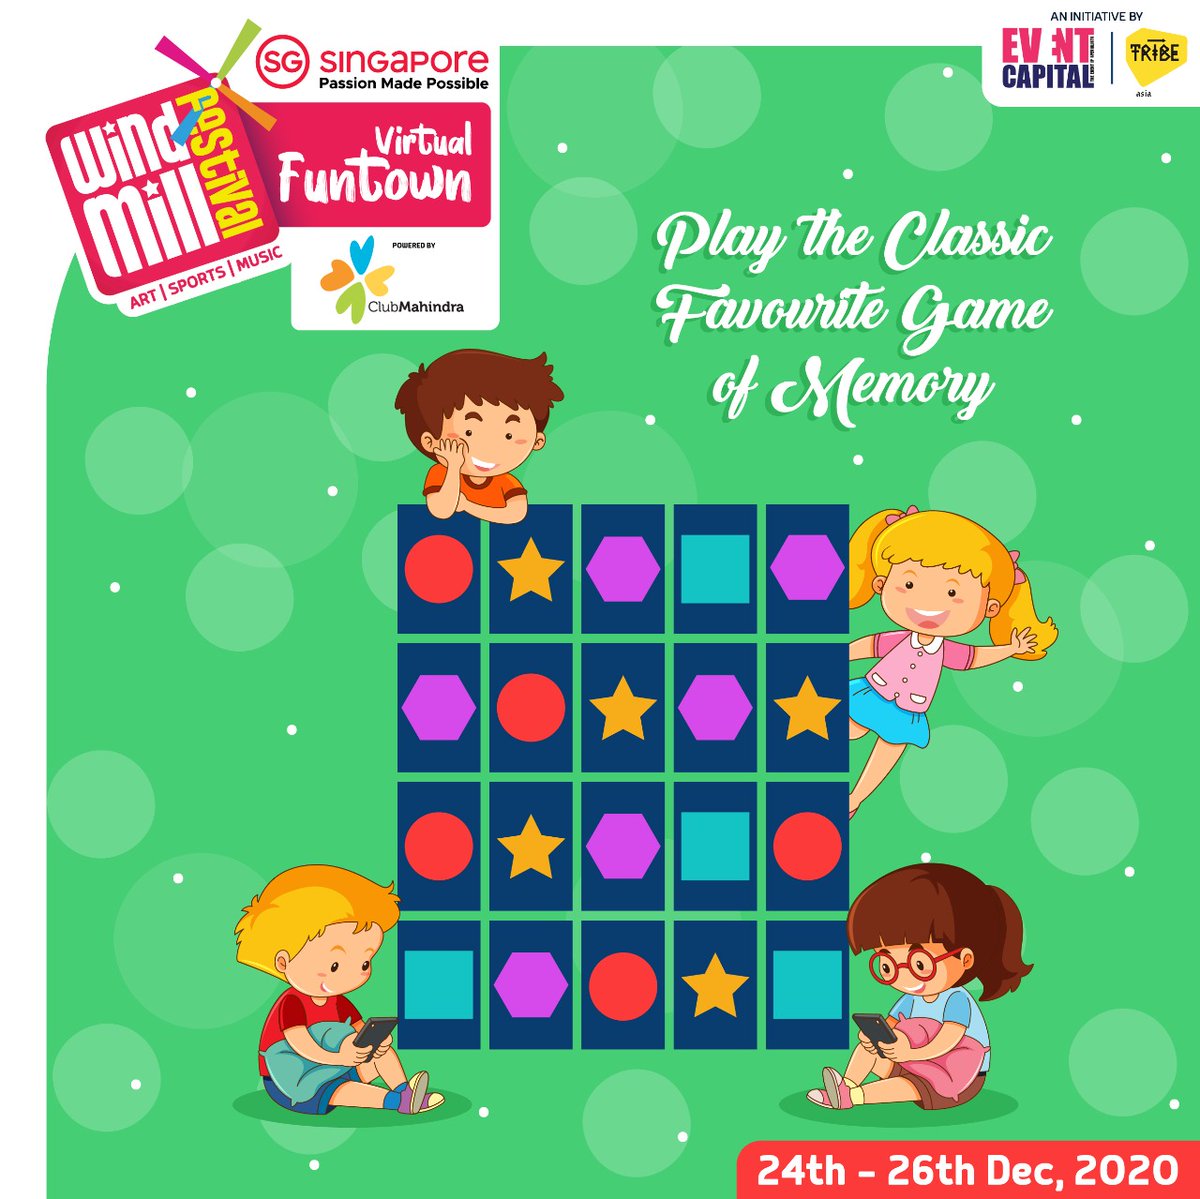 Ready for some fun Mental Challenge? Play the virtual Memory Games at the WindMill Festival Virtual Funtown- Christmas Edition. Register Now. virtualfuntown.live @Event_Capital #windmillfest #letswindmill #windmillchristmas #windmill2020 #kidsfestival #christmas